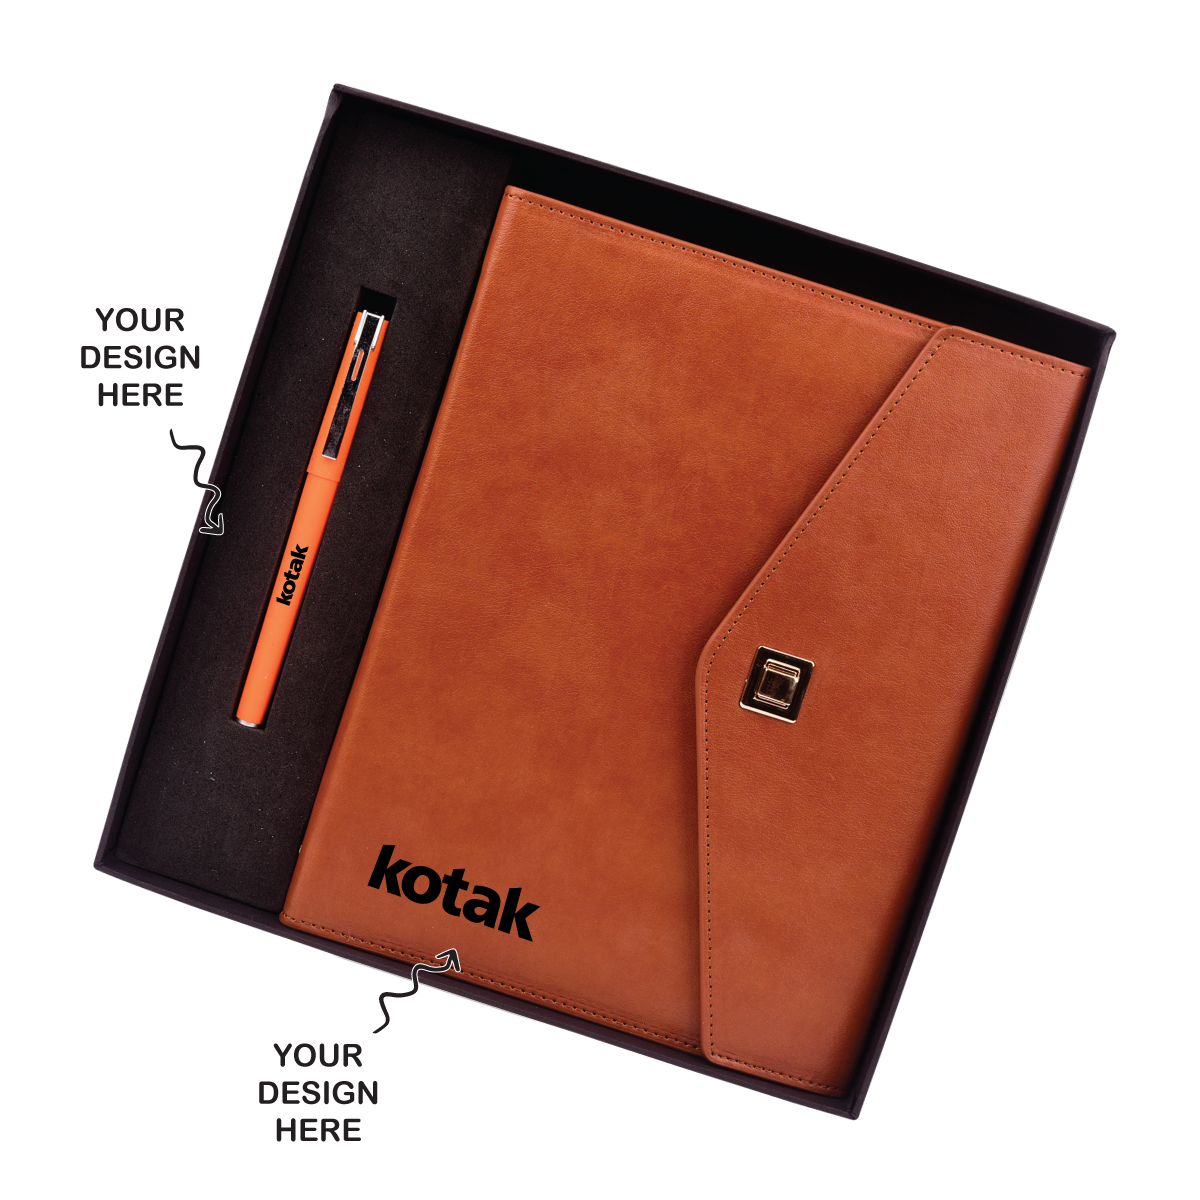 Personalized 2 in 1 Tan Leather Finished 8000mAh Power Bank Notebook Diary with Pen Combo Gift Set - For Employee Joining Kit, Client, Dealer Gifting, Corporate Gifting or Return Gift HK10263